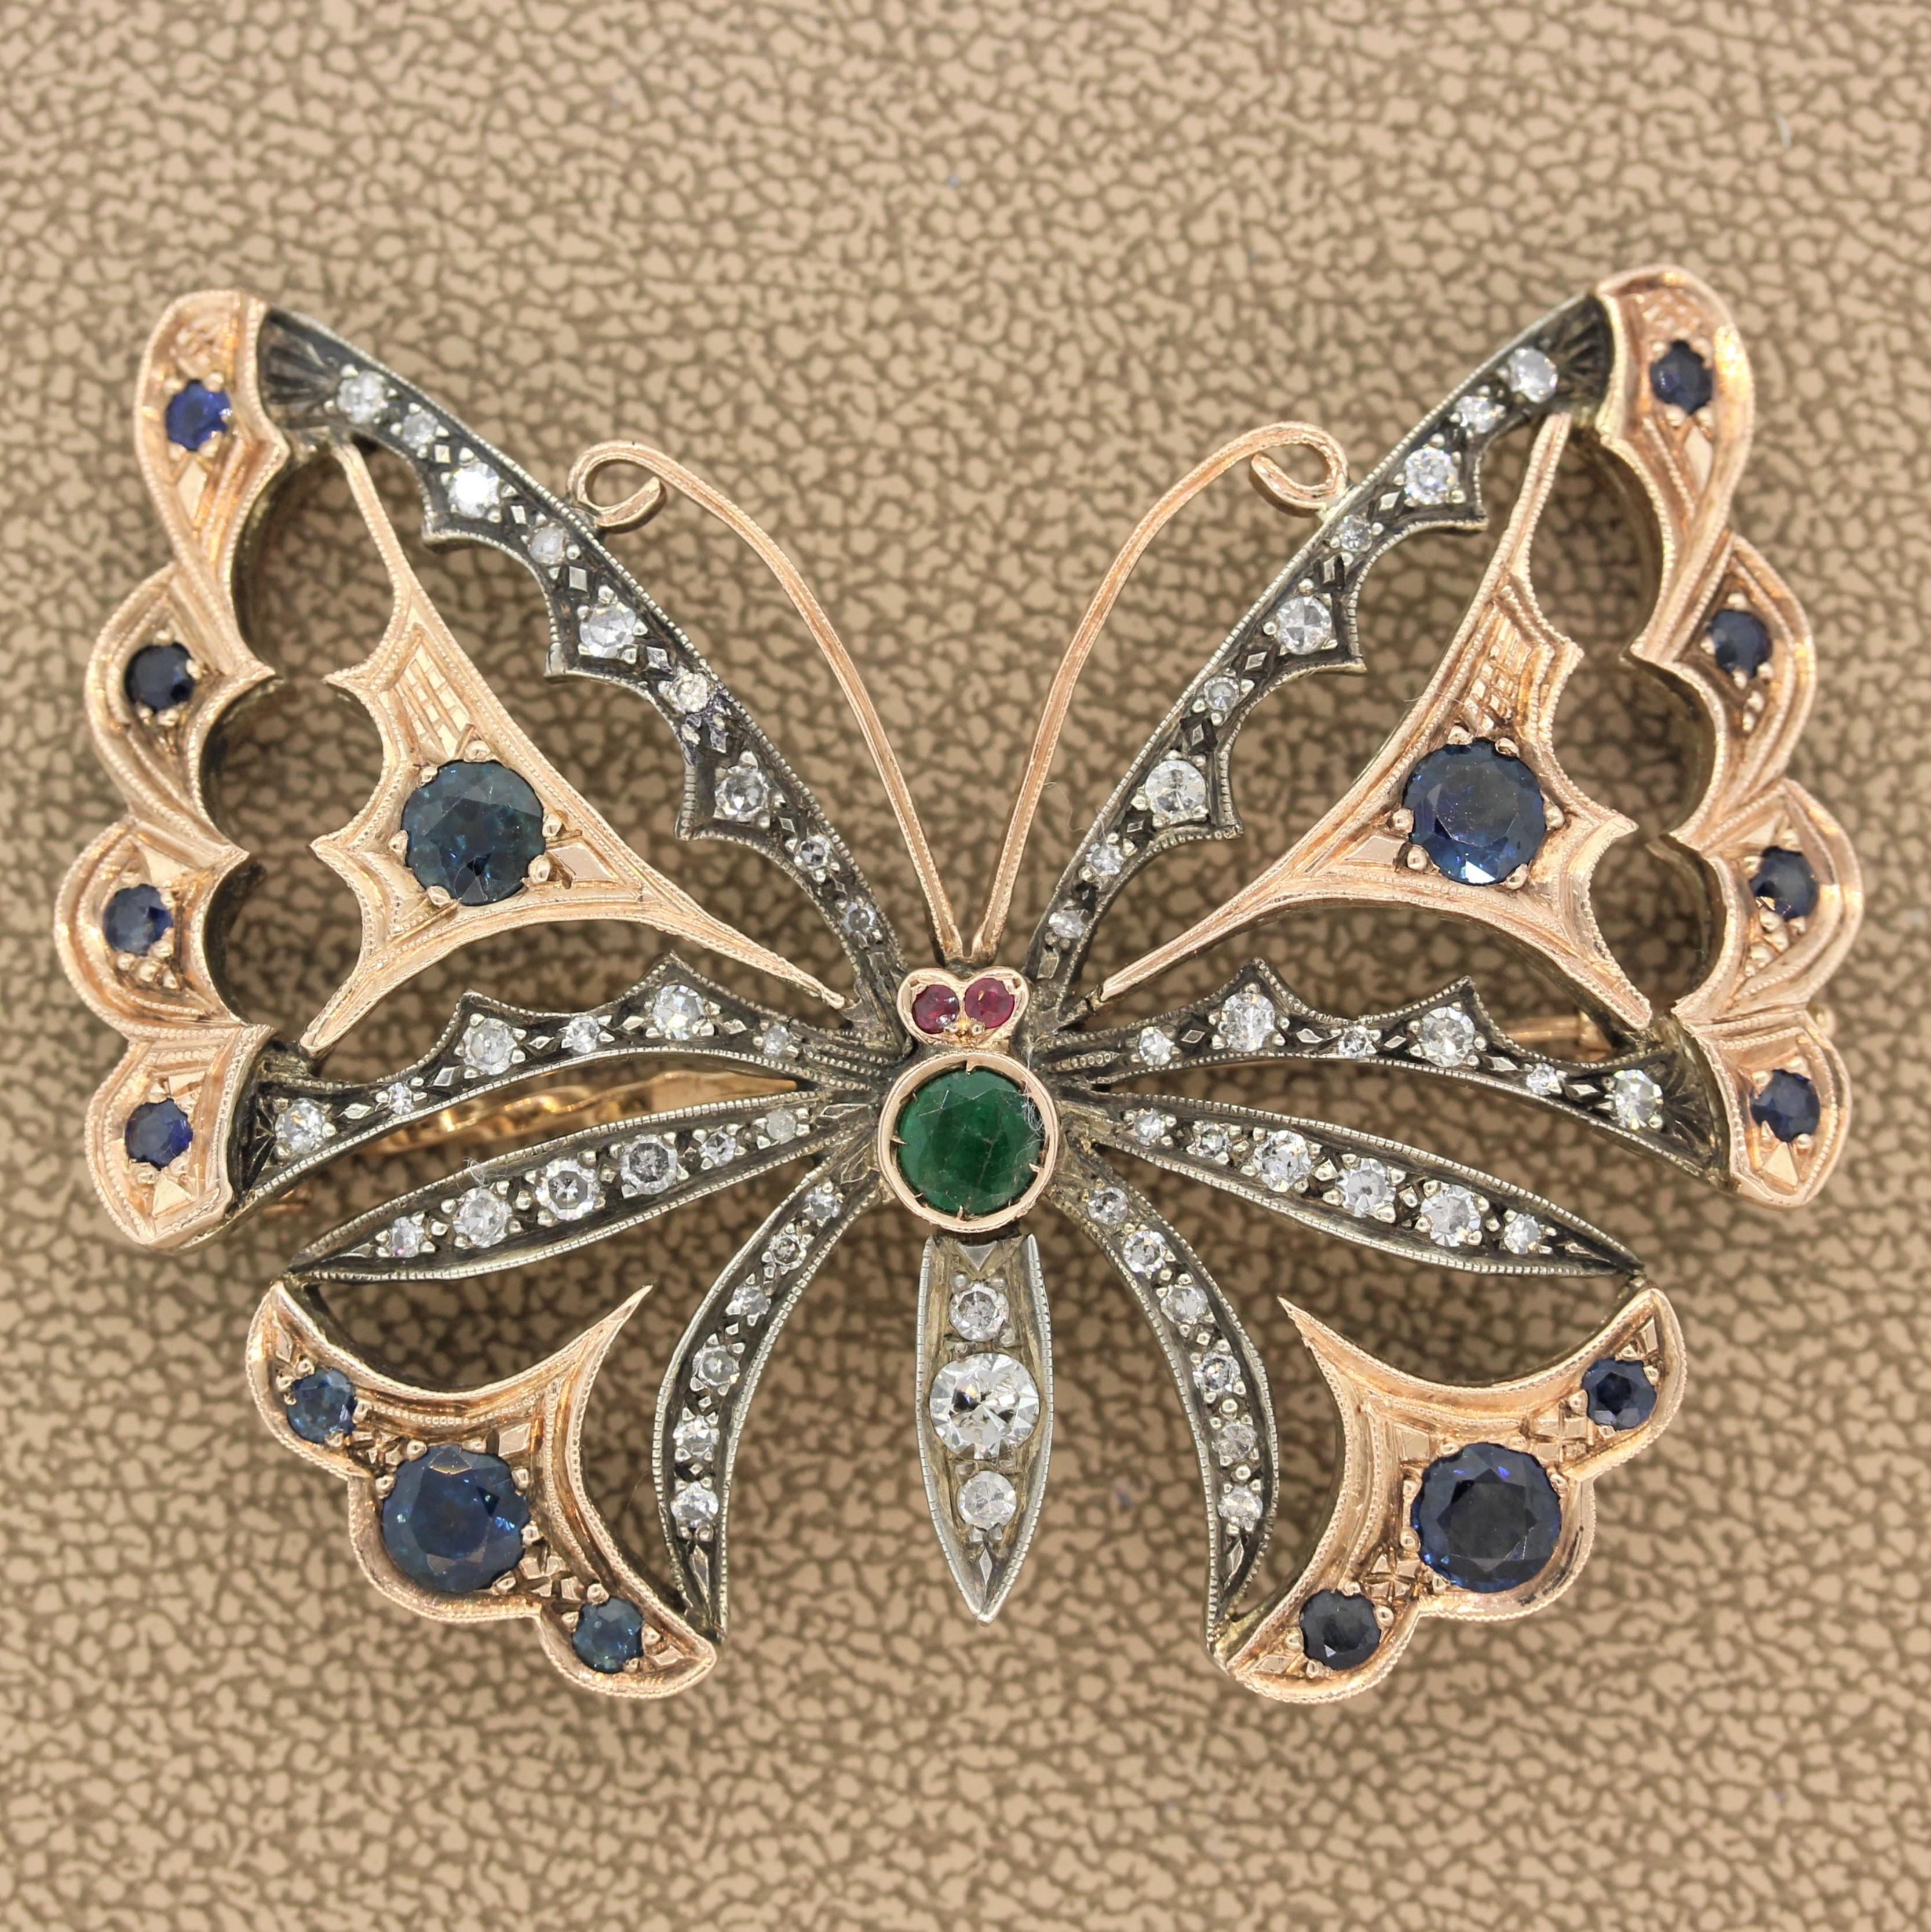 A regal estate butterfly with her wings spread to show her body of blue sapphires, colorless diamonds and a single emerald along with ruby eyes. This exceptional butterfly is made of 14K white and rose gold. 

Brooch Length: 2.25 inches 
Brooch